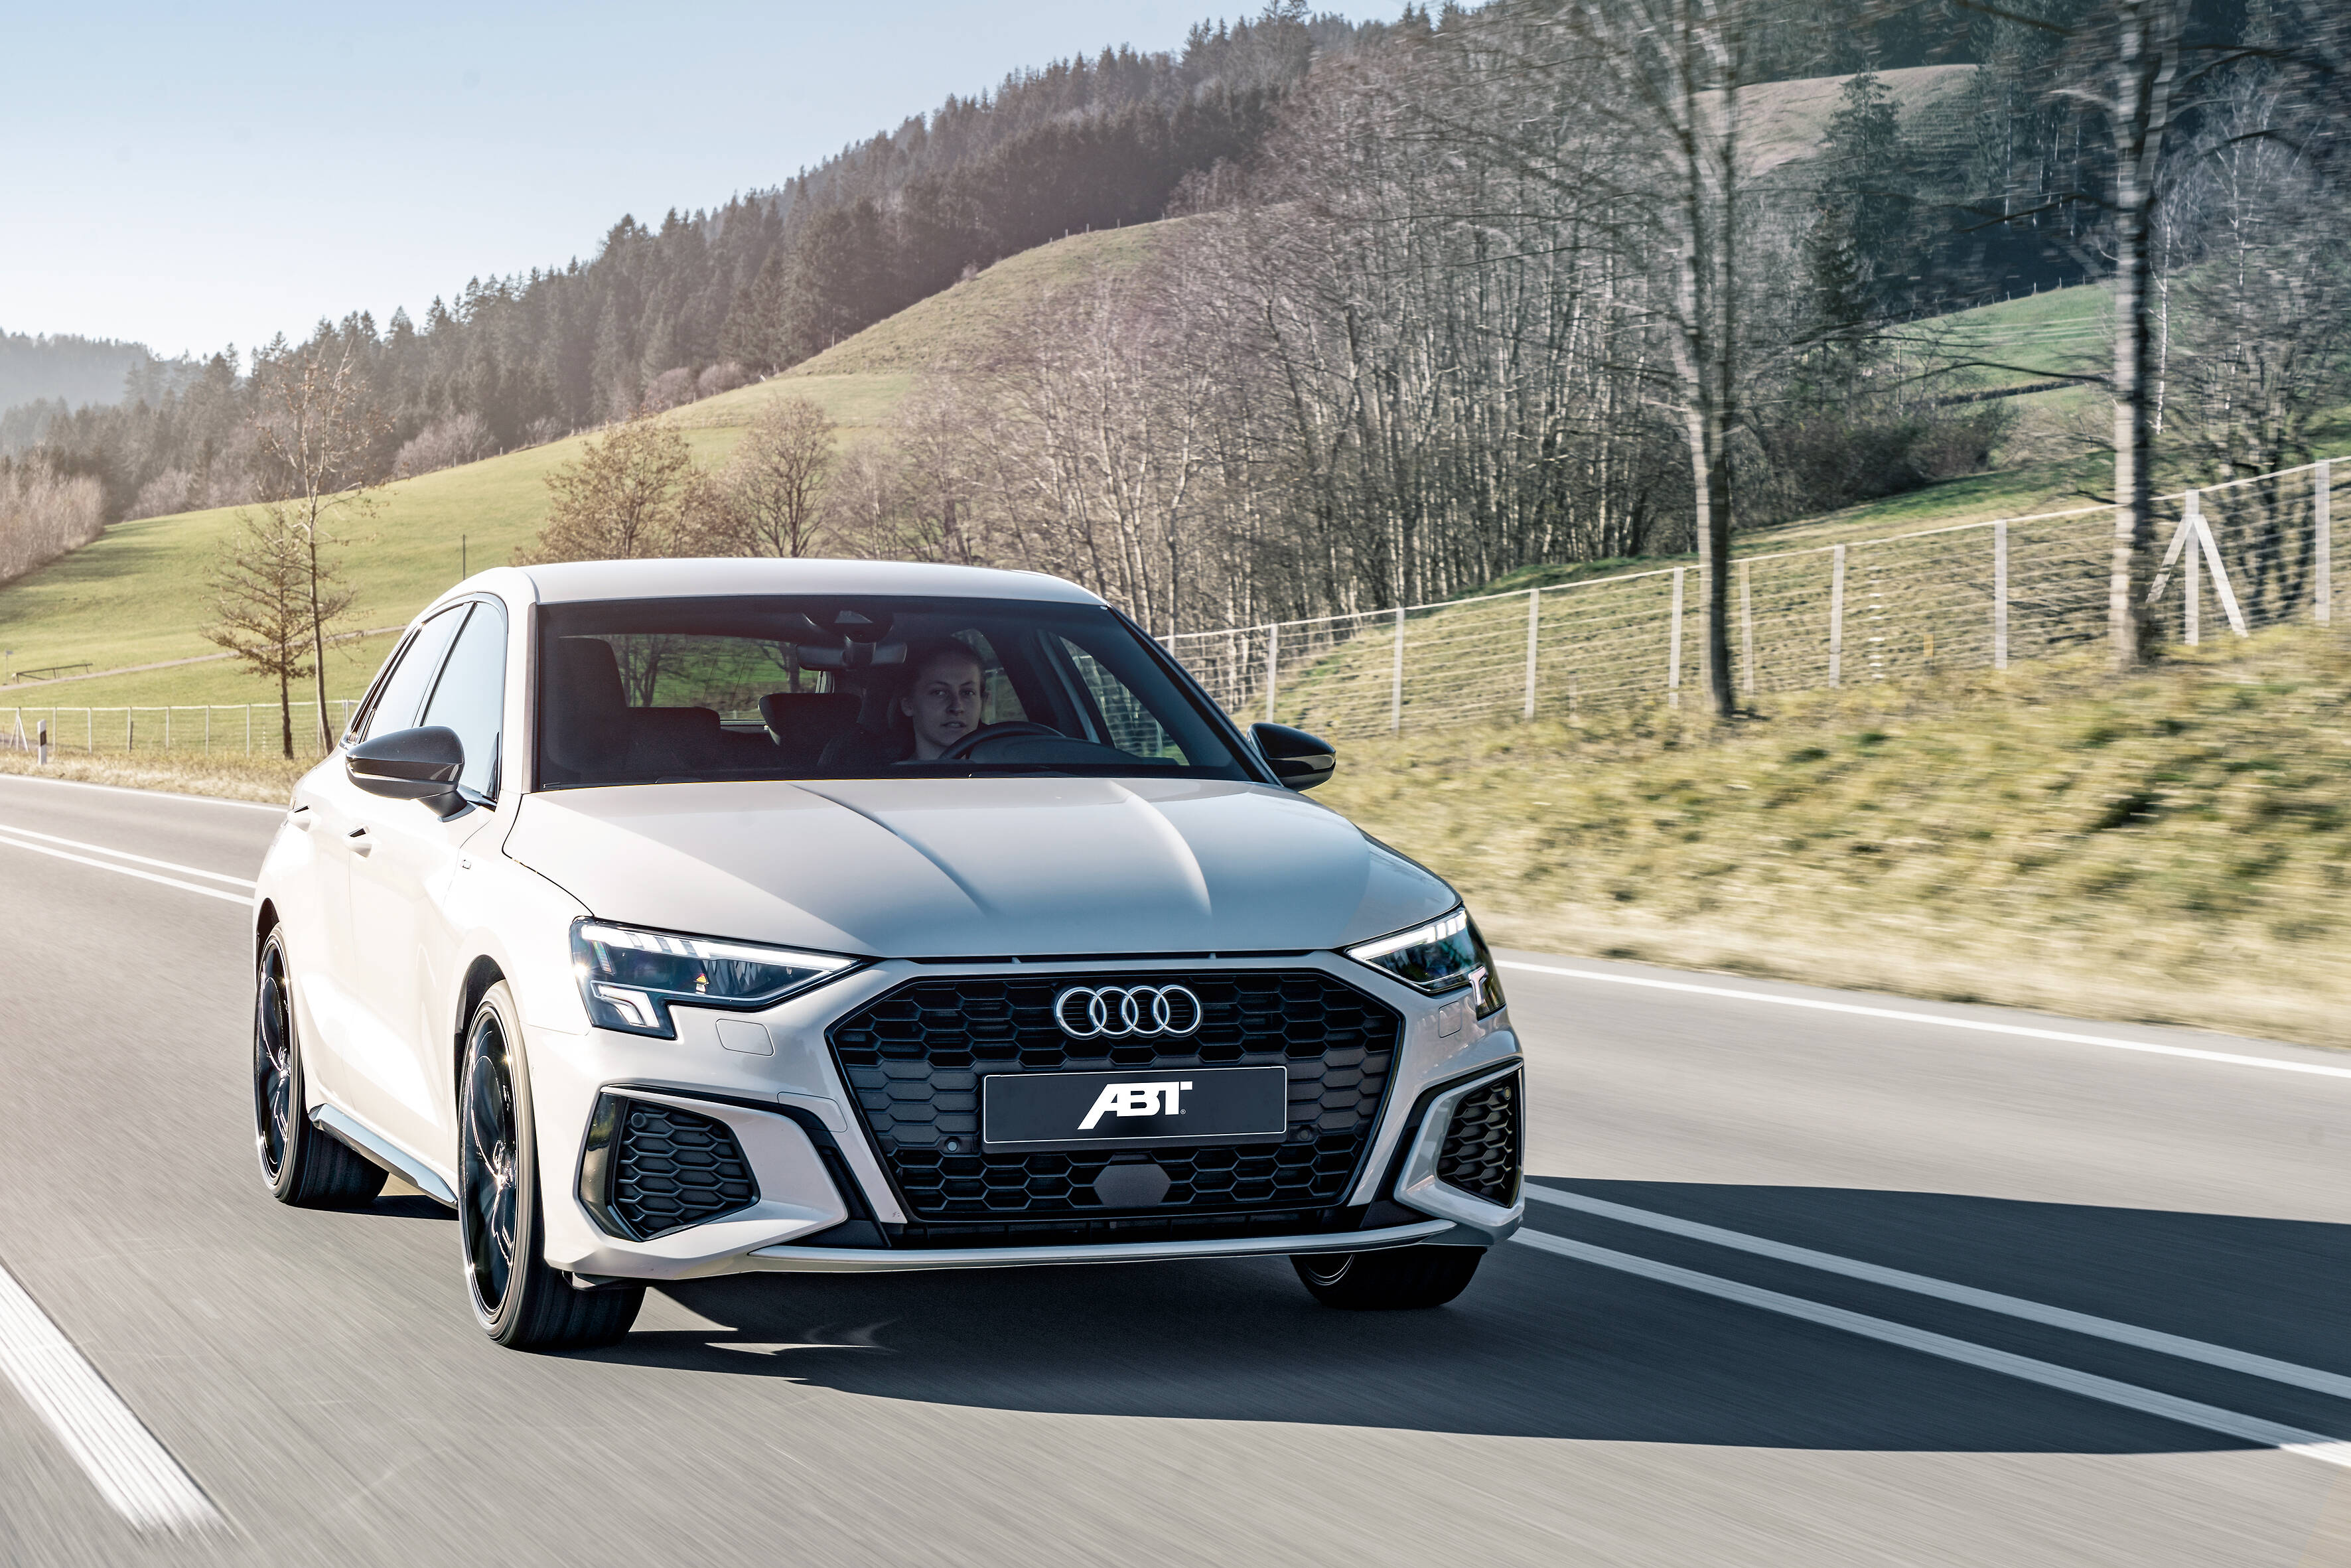 190 HP for just EUR 999: the new ABT Engine Control Power - Audi ...